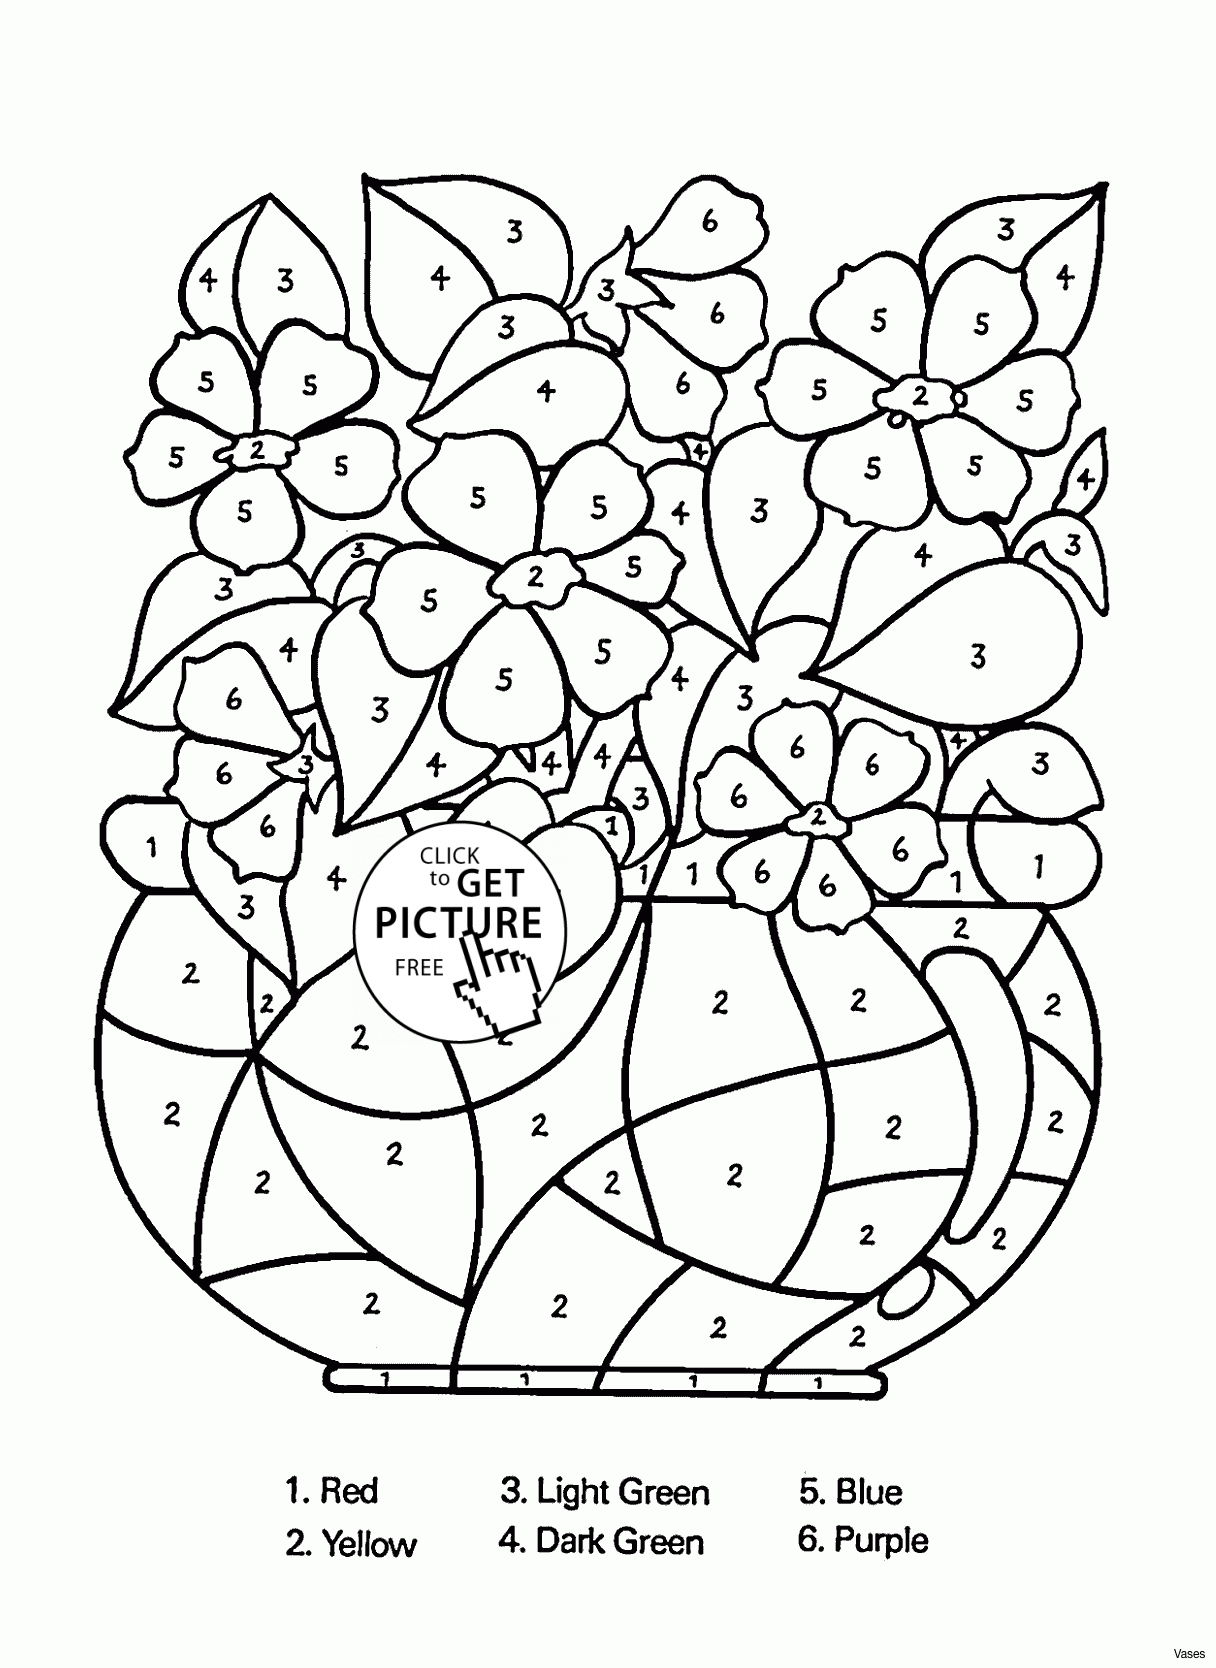 Kindness Coloring Pages Coloring Ideas Marvelous Freele Kindness Coloring Pages Image